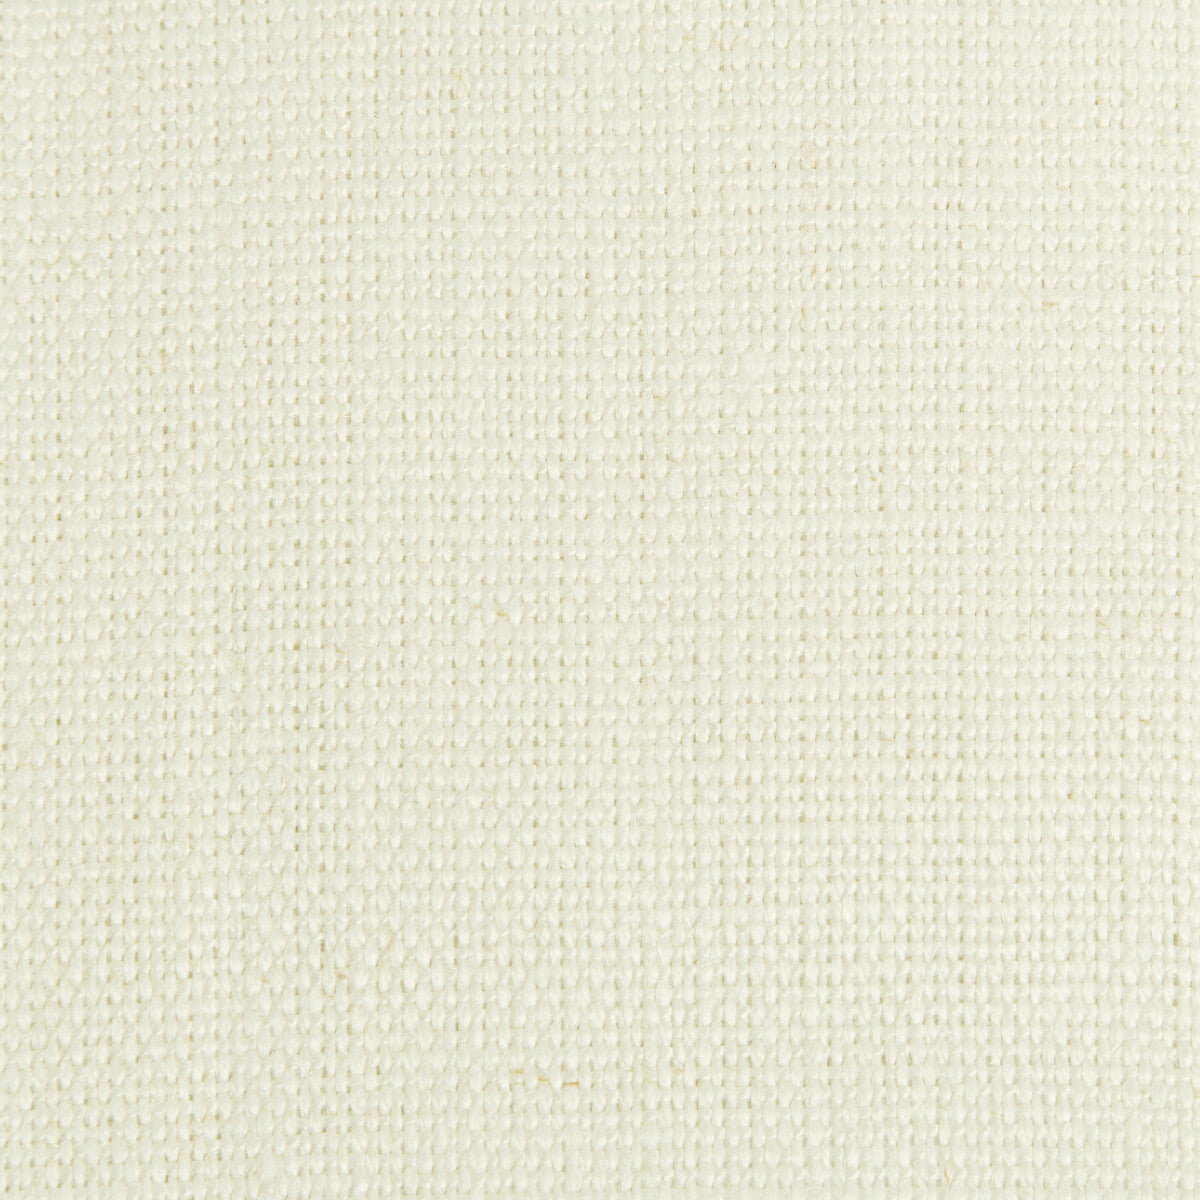 Hampton Linen fabric in snow color - pattern 2012171.111.0 - by Lee Jofa in the Colour Complements II collection